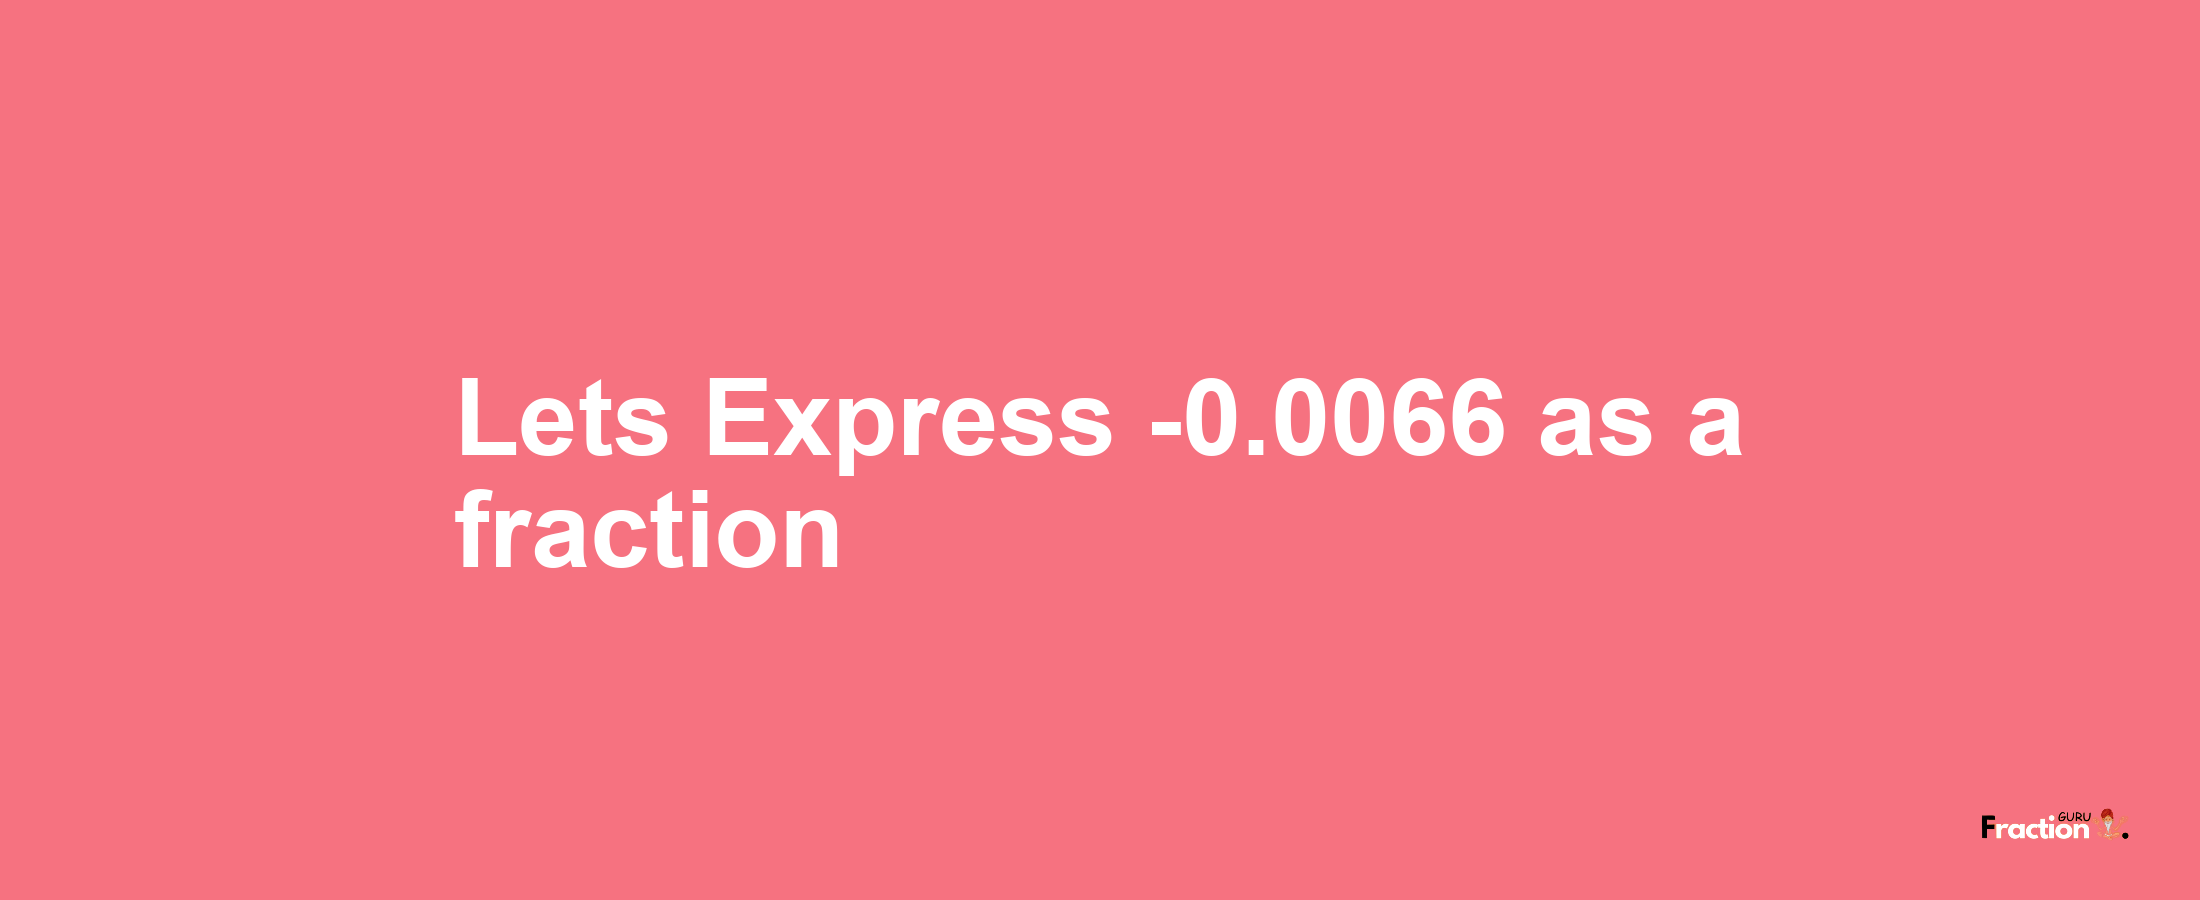 Lets Express -0.0066 as afraction